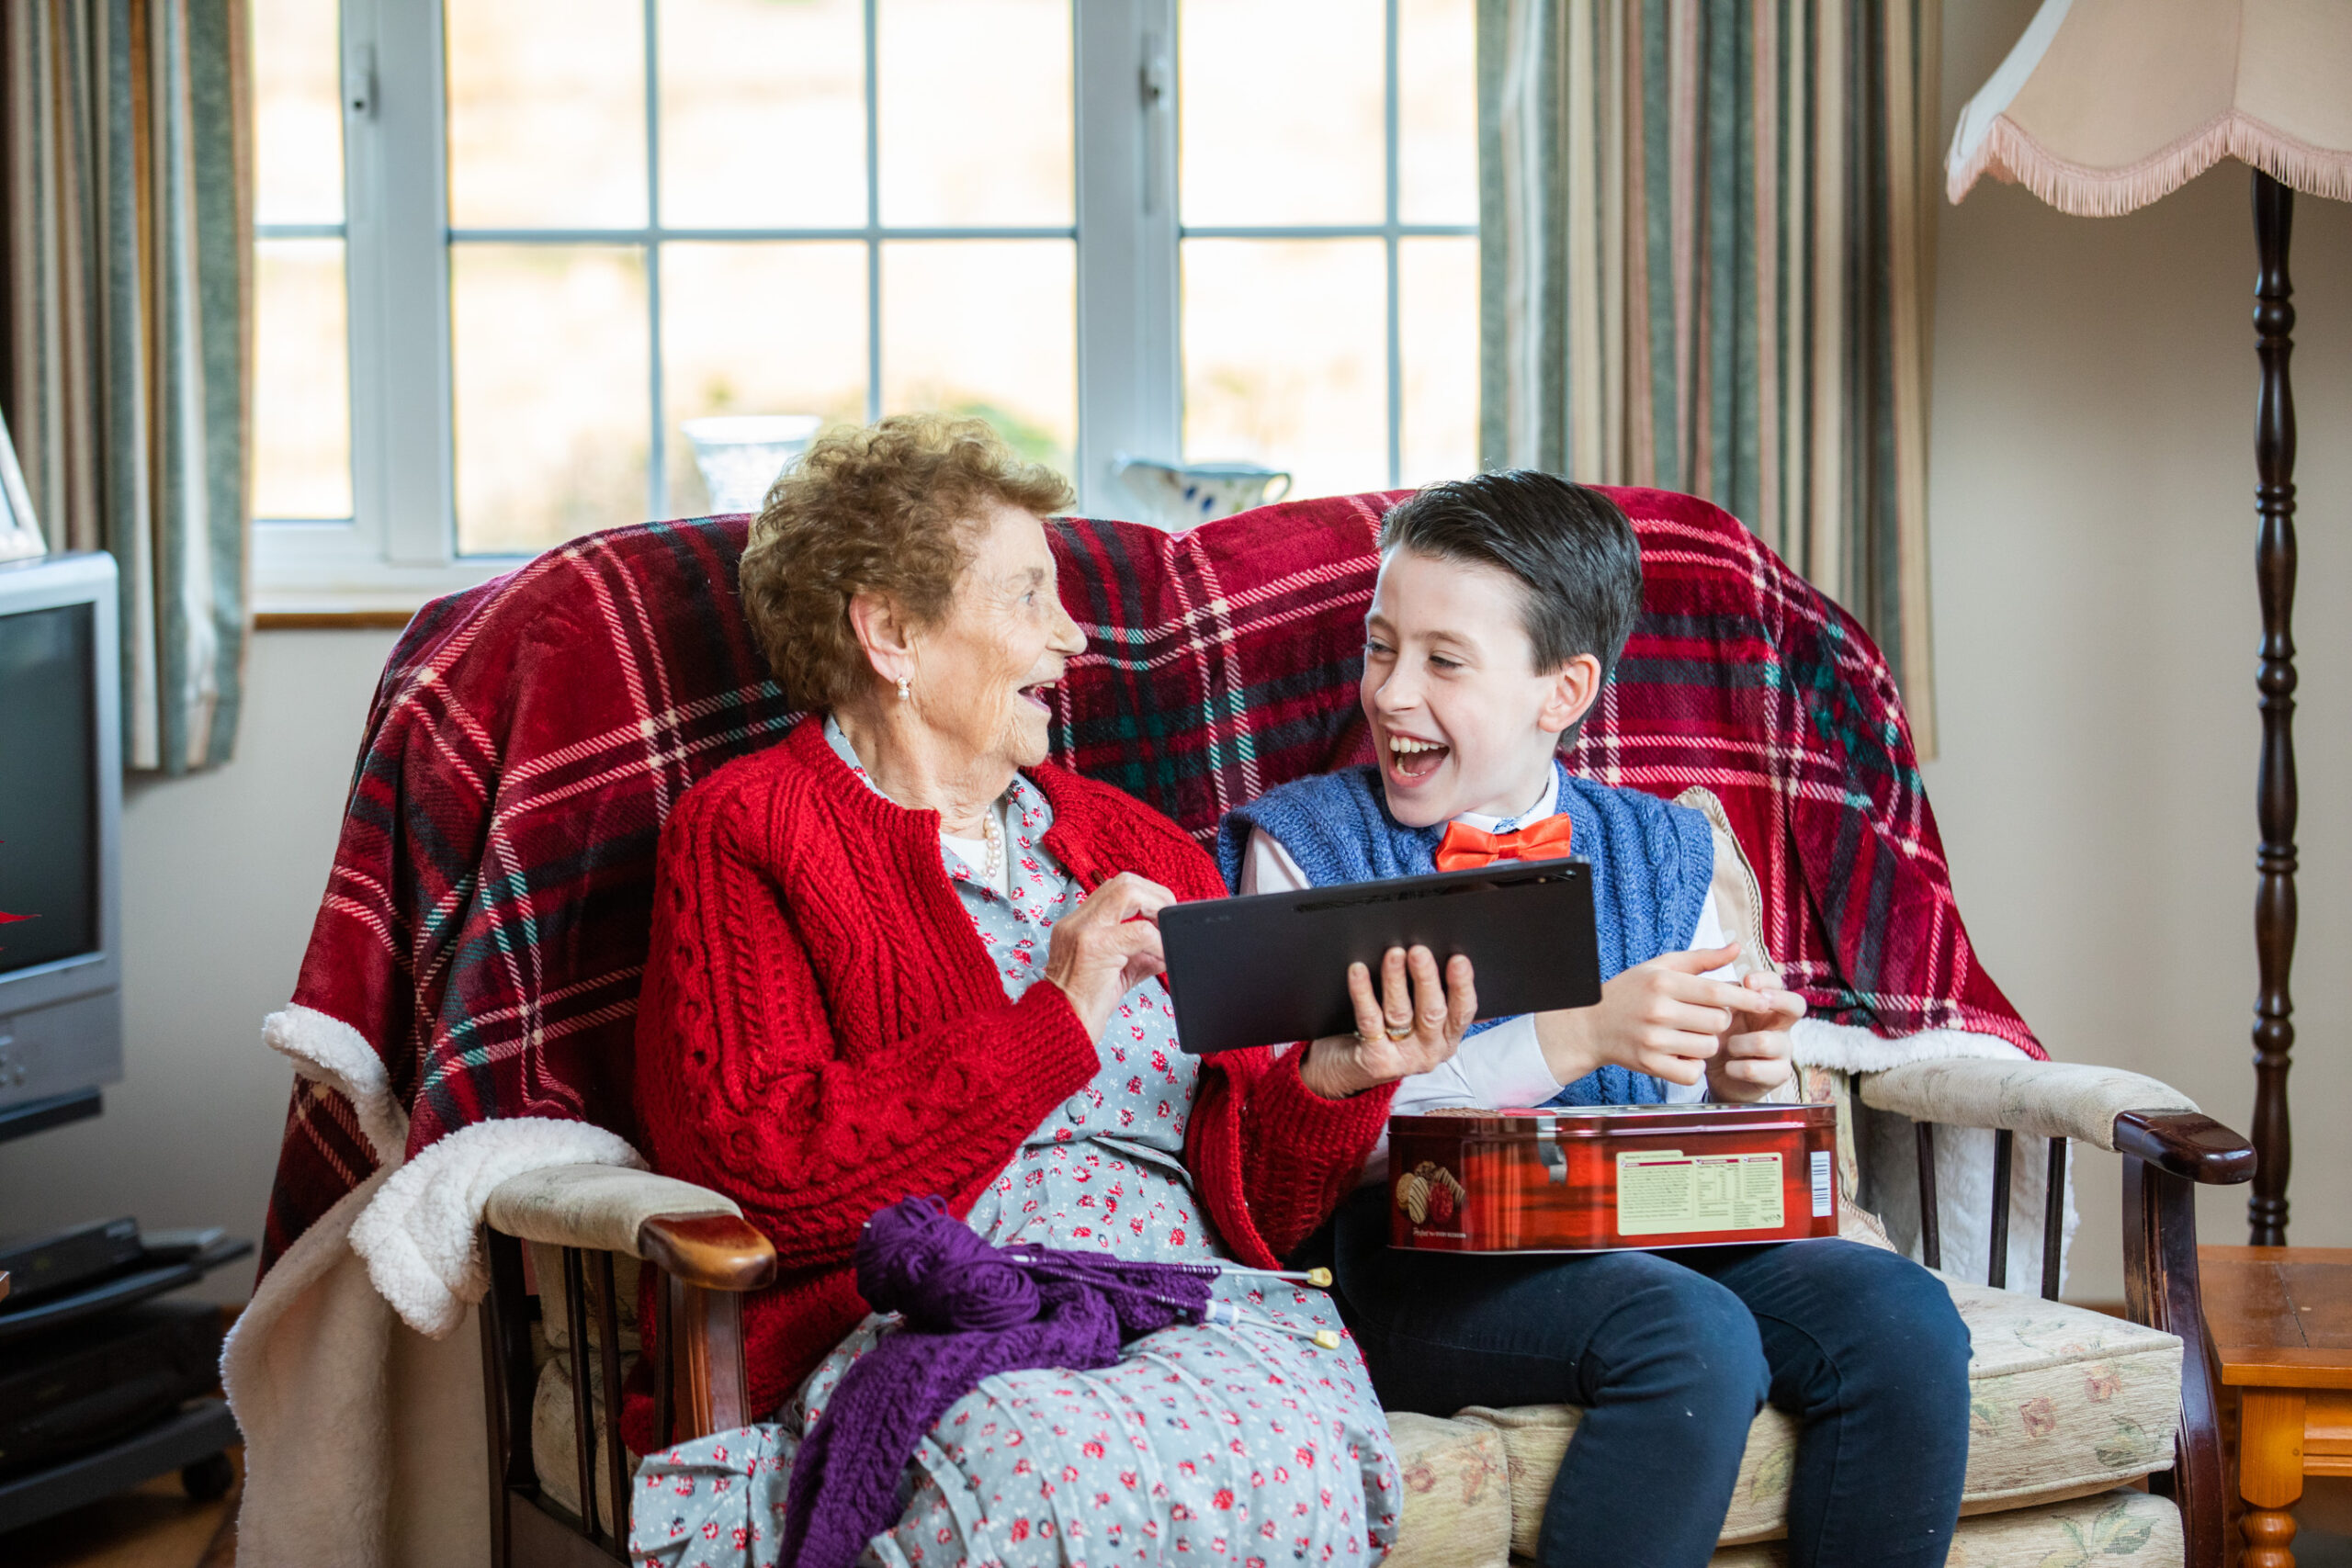 81% of Irish consumers believe their older relatives would have a better quality of life if they had improved digital skills